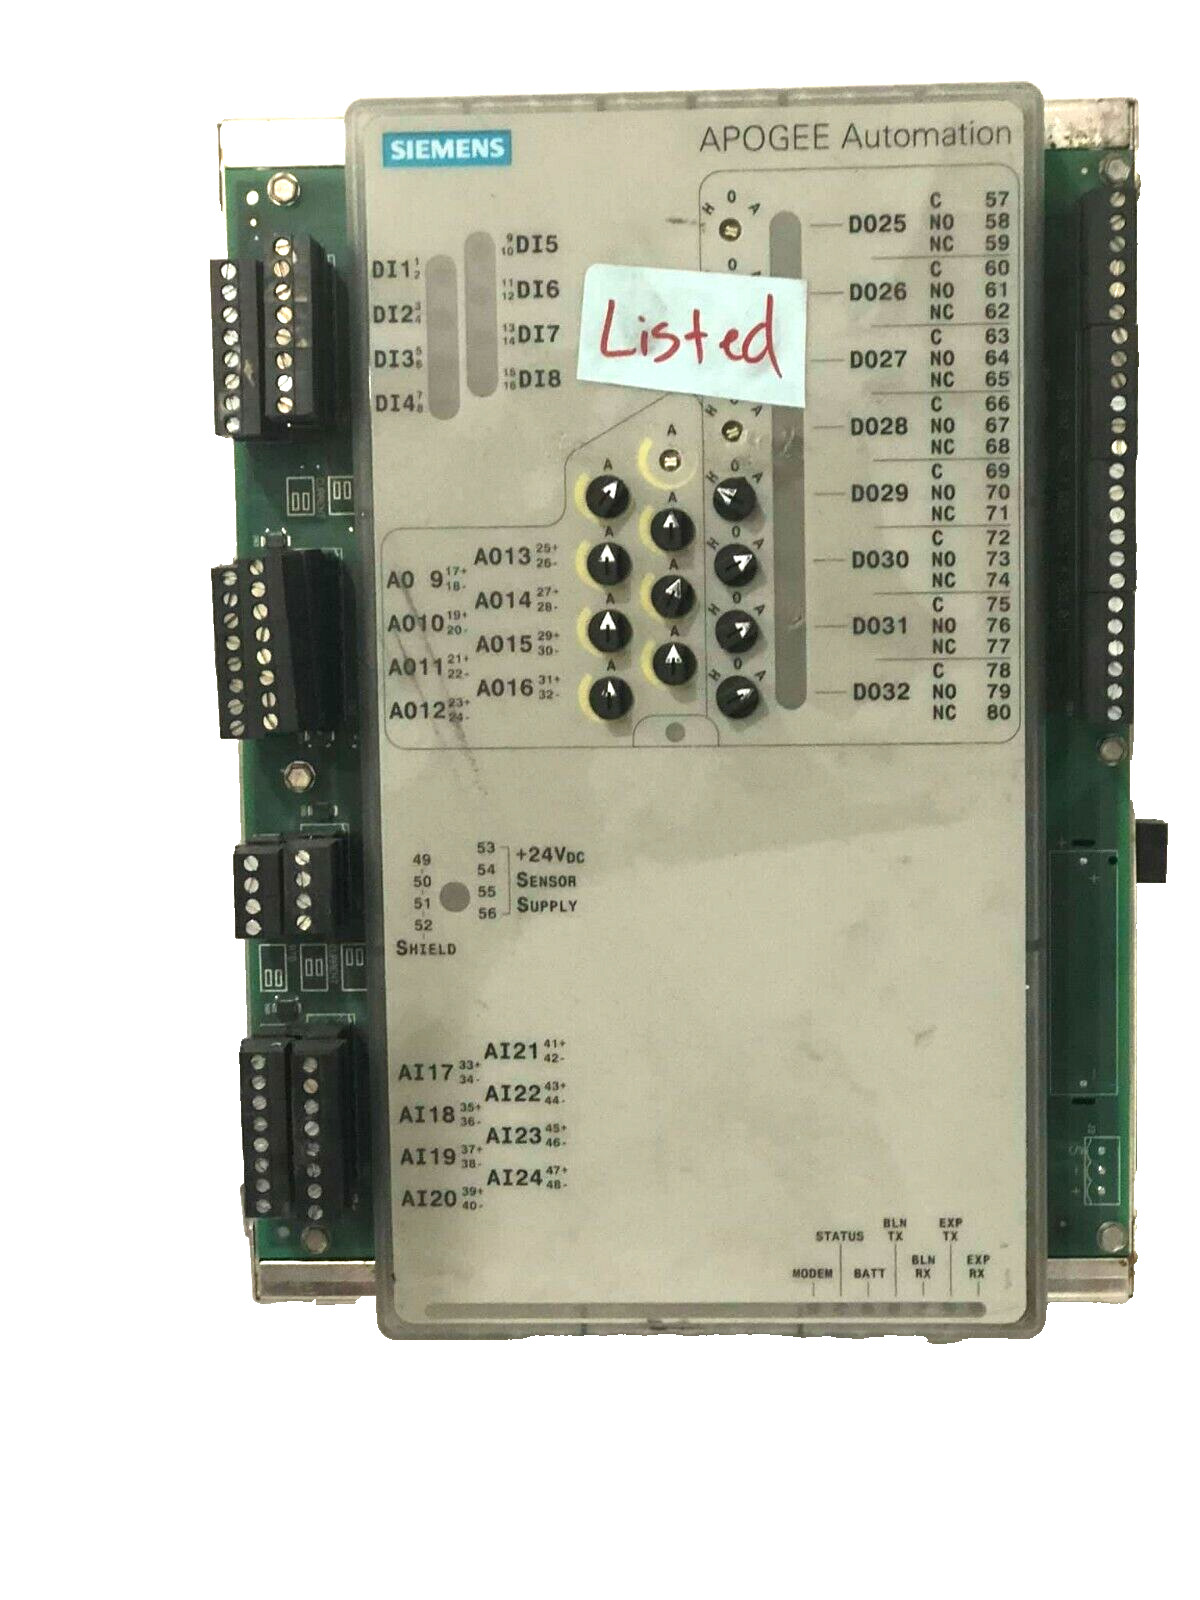 Siemens APOGEE Automation 549-032 Controller 